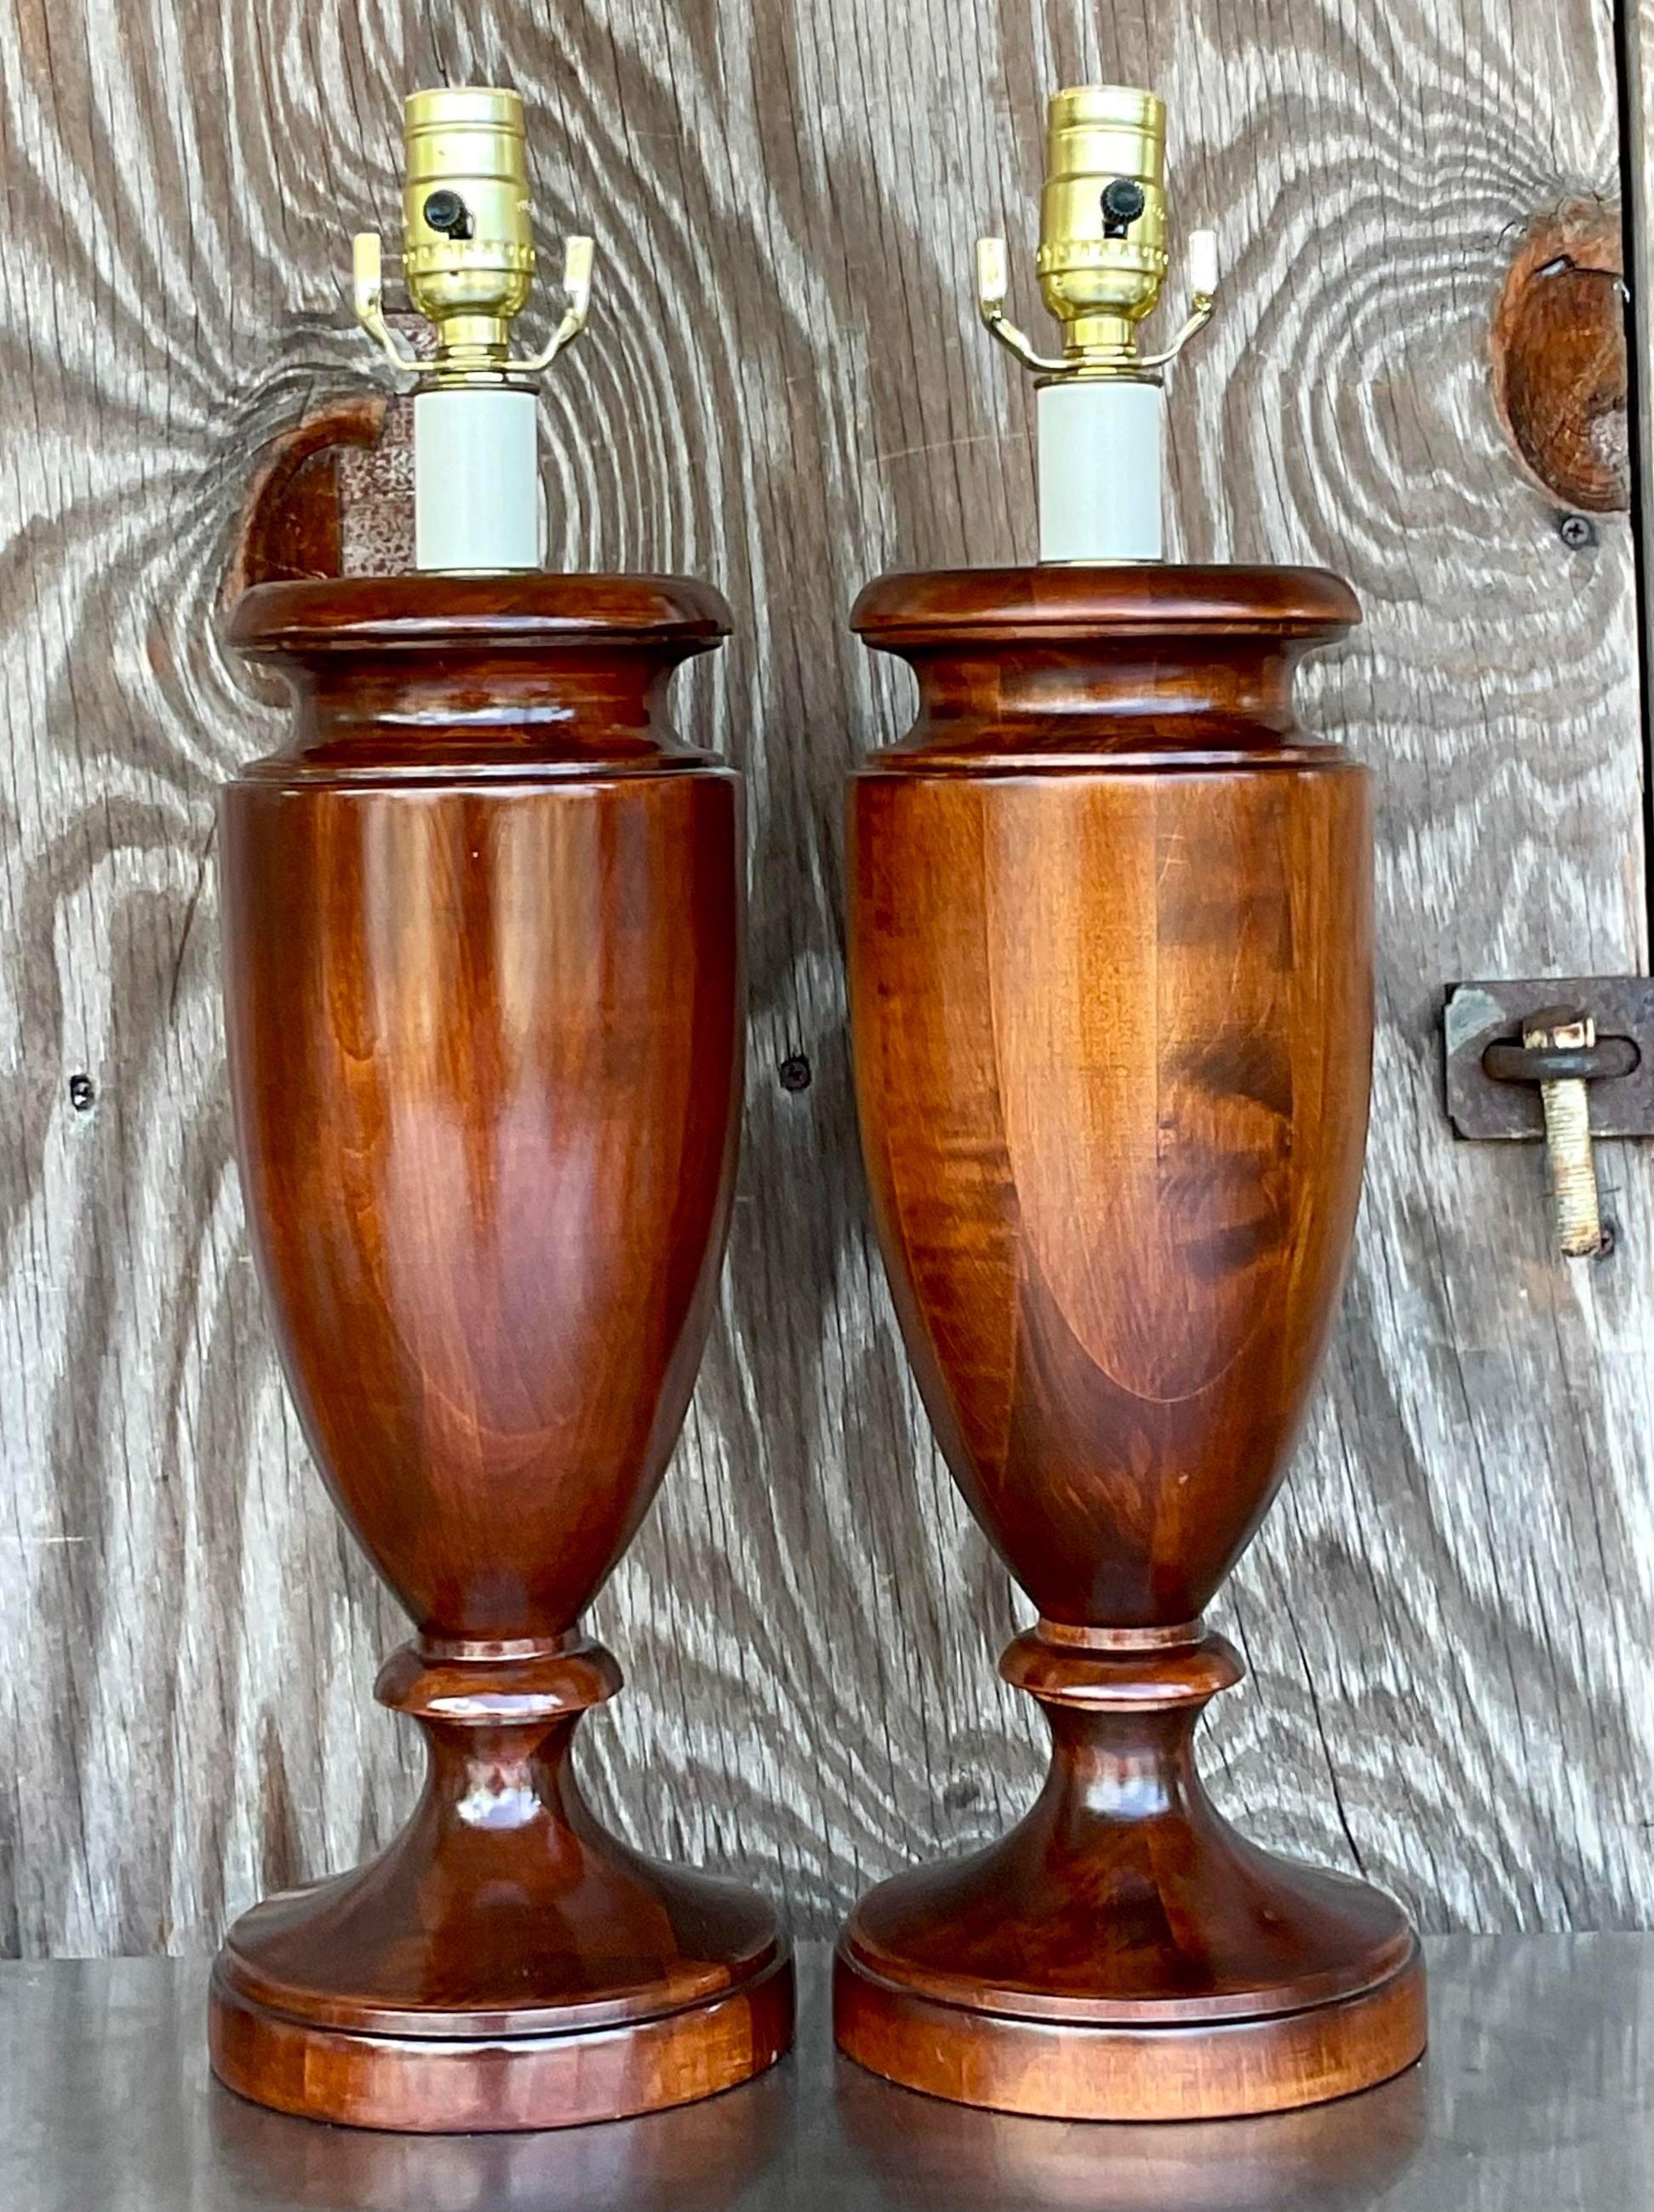 A fabulous pair of vintage Regency table lamps. Gorgeous wood turned lamps in an urn design. Beautiful wood grain detail. Acquired from a Palm Beach estate.